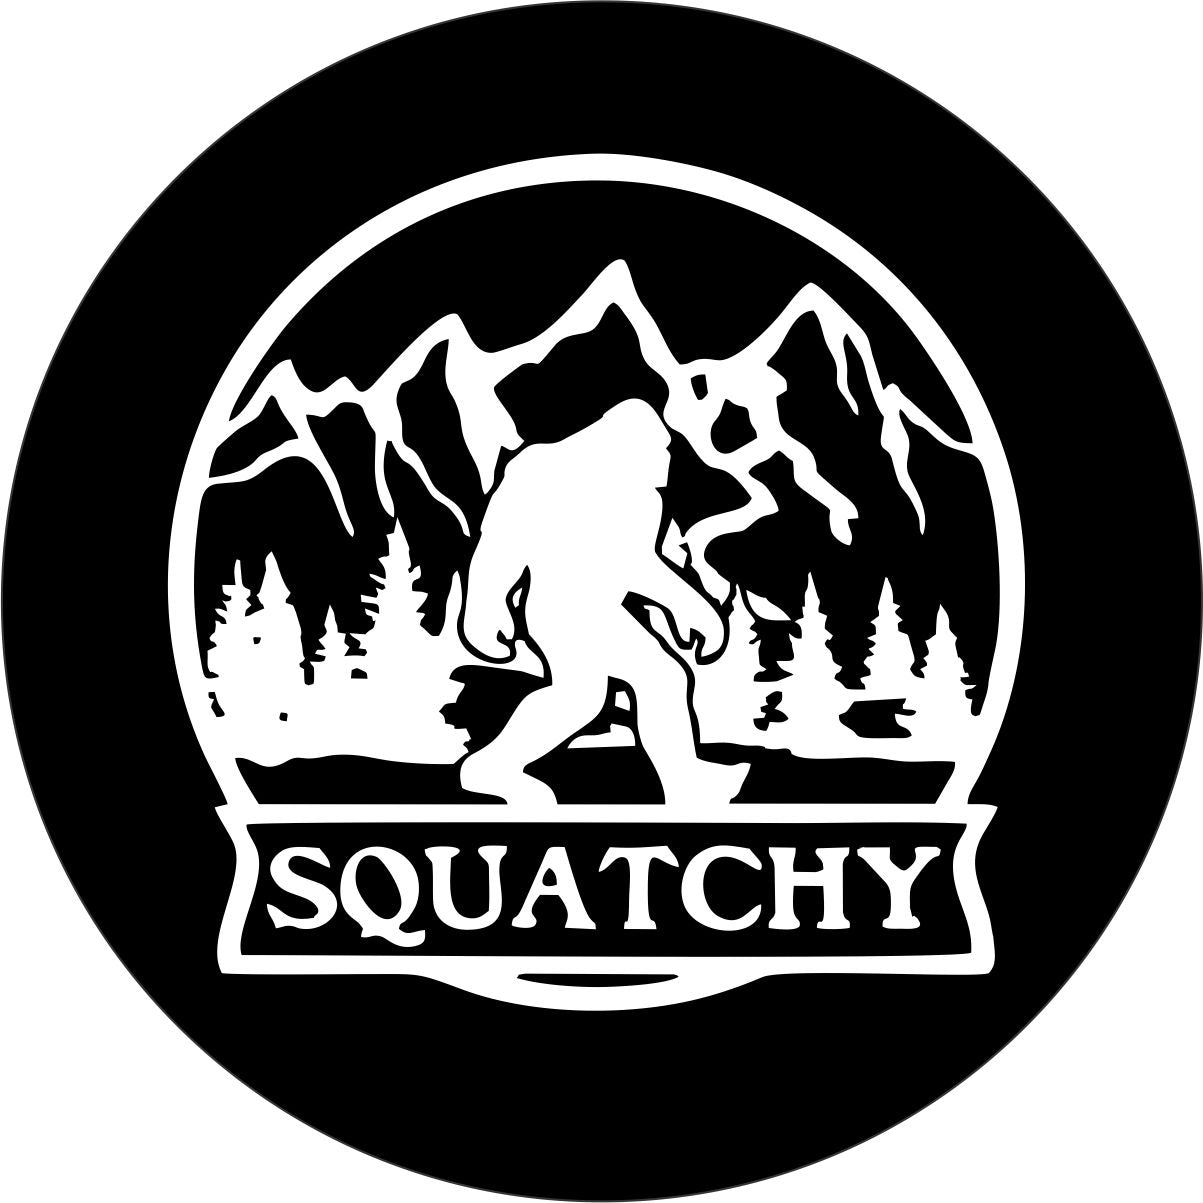 Spare tire cover design of a silhouette of sasquatch walking in the mountains with the word squatchy.